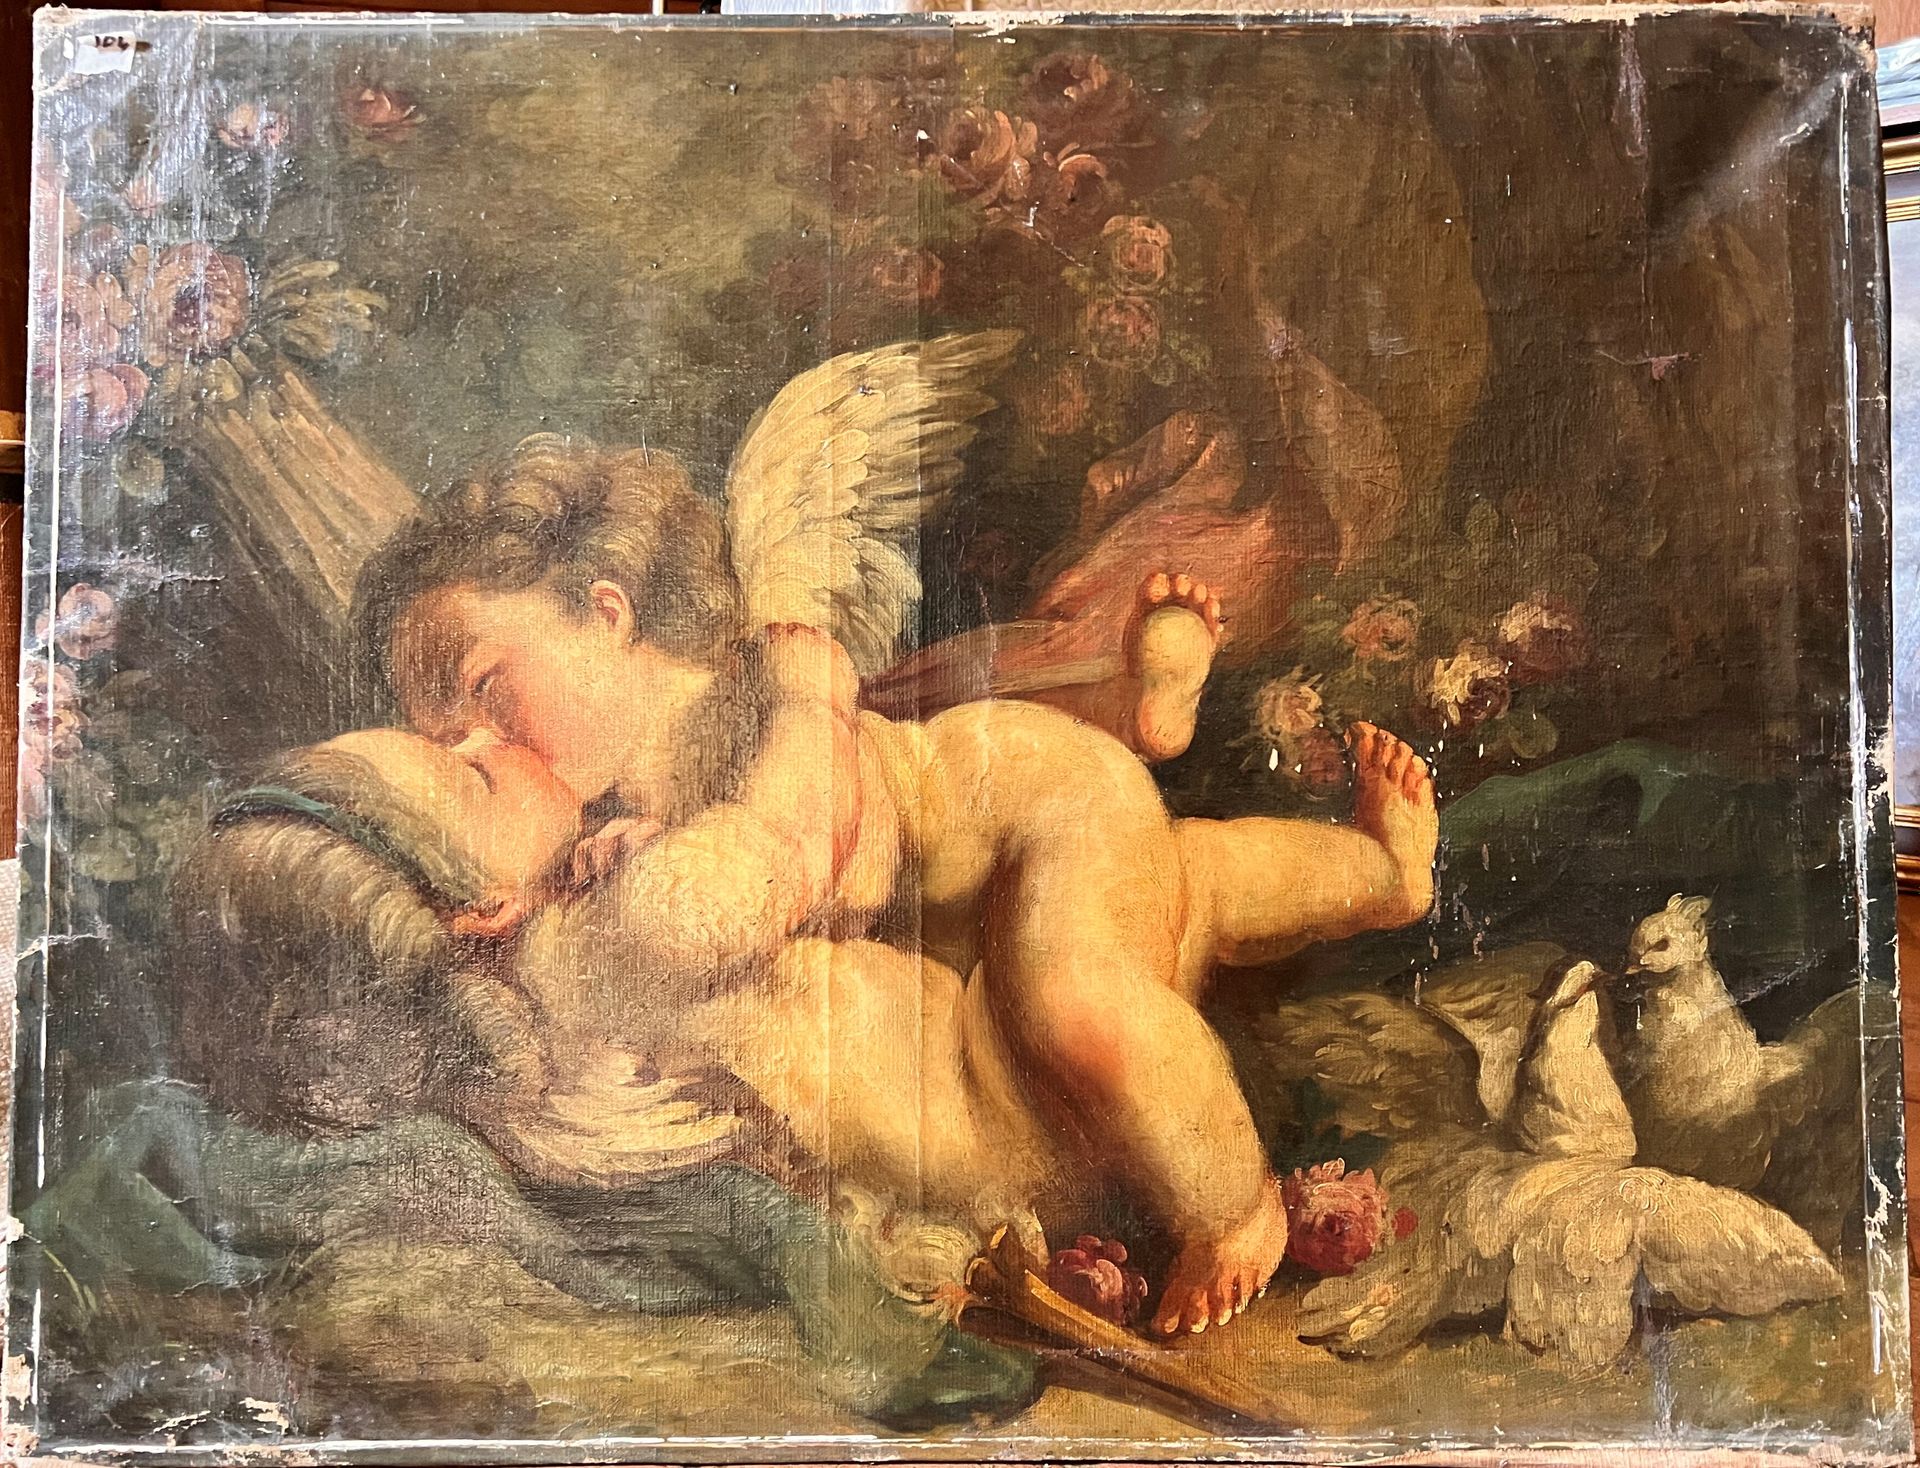 Null TWO DOORBELTS on canvas representing putti kissing. Height 63 - Width 81 cm